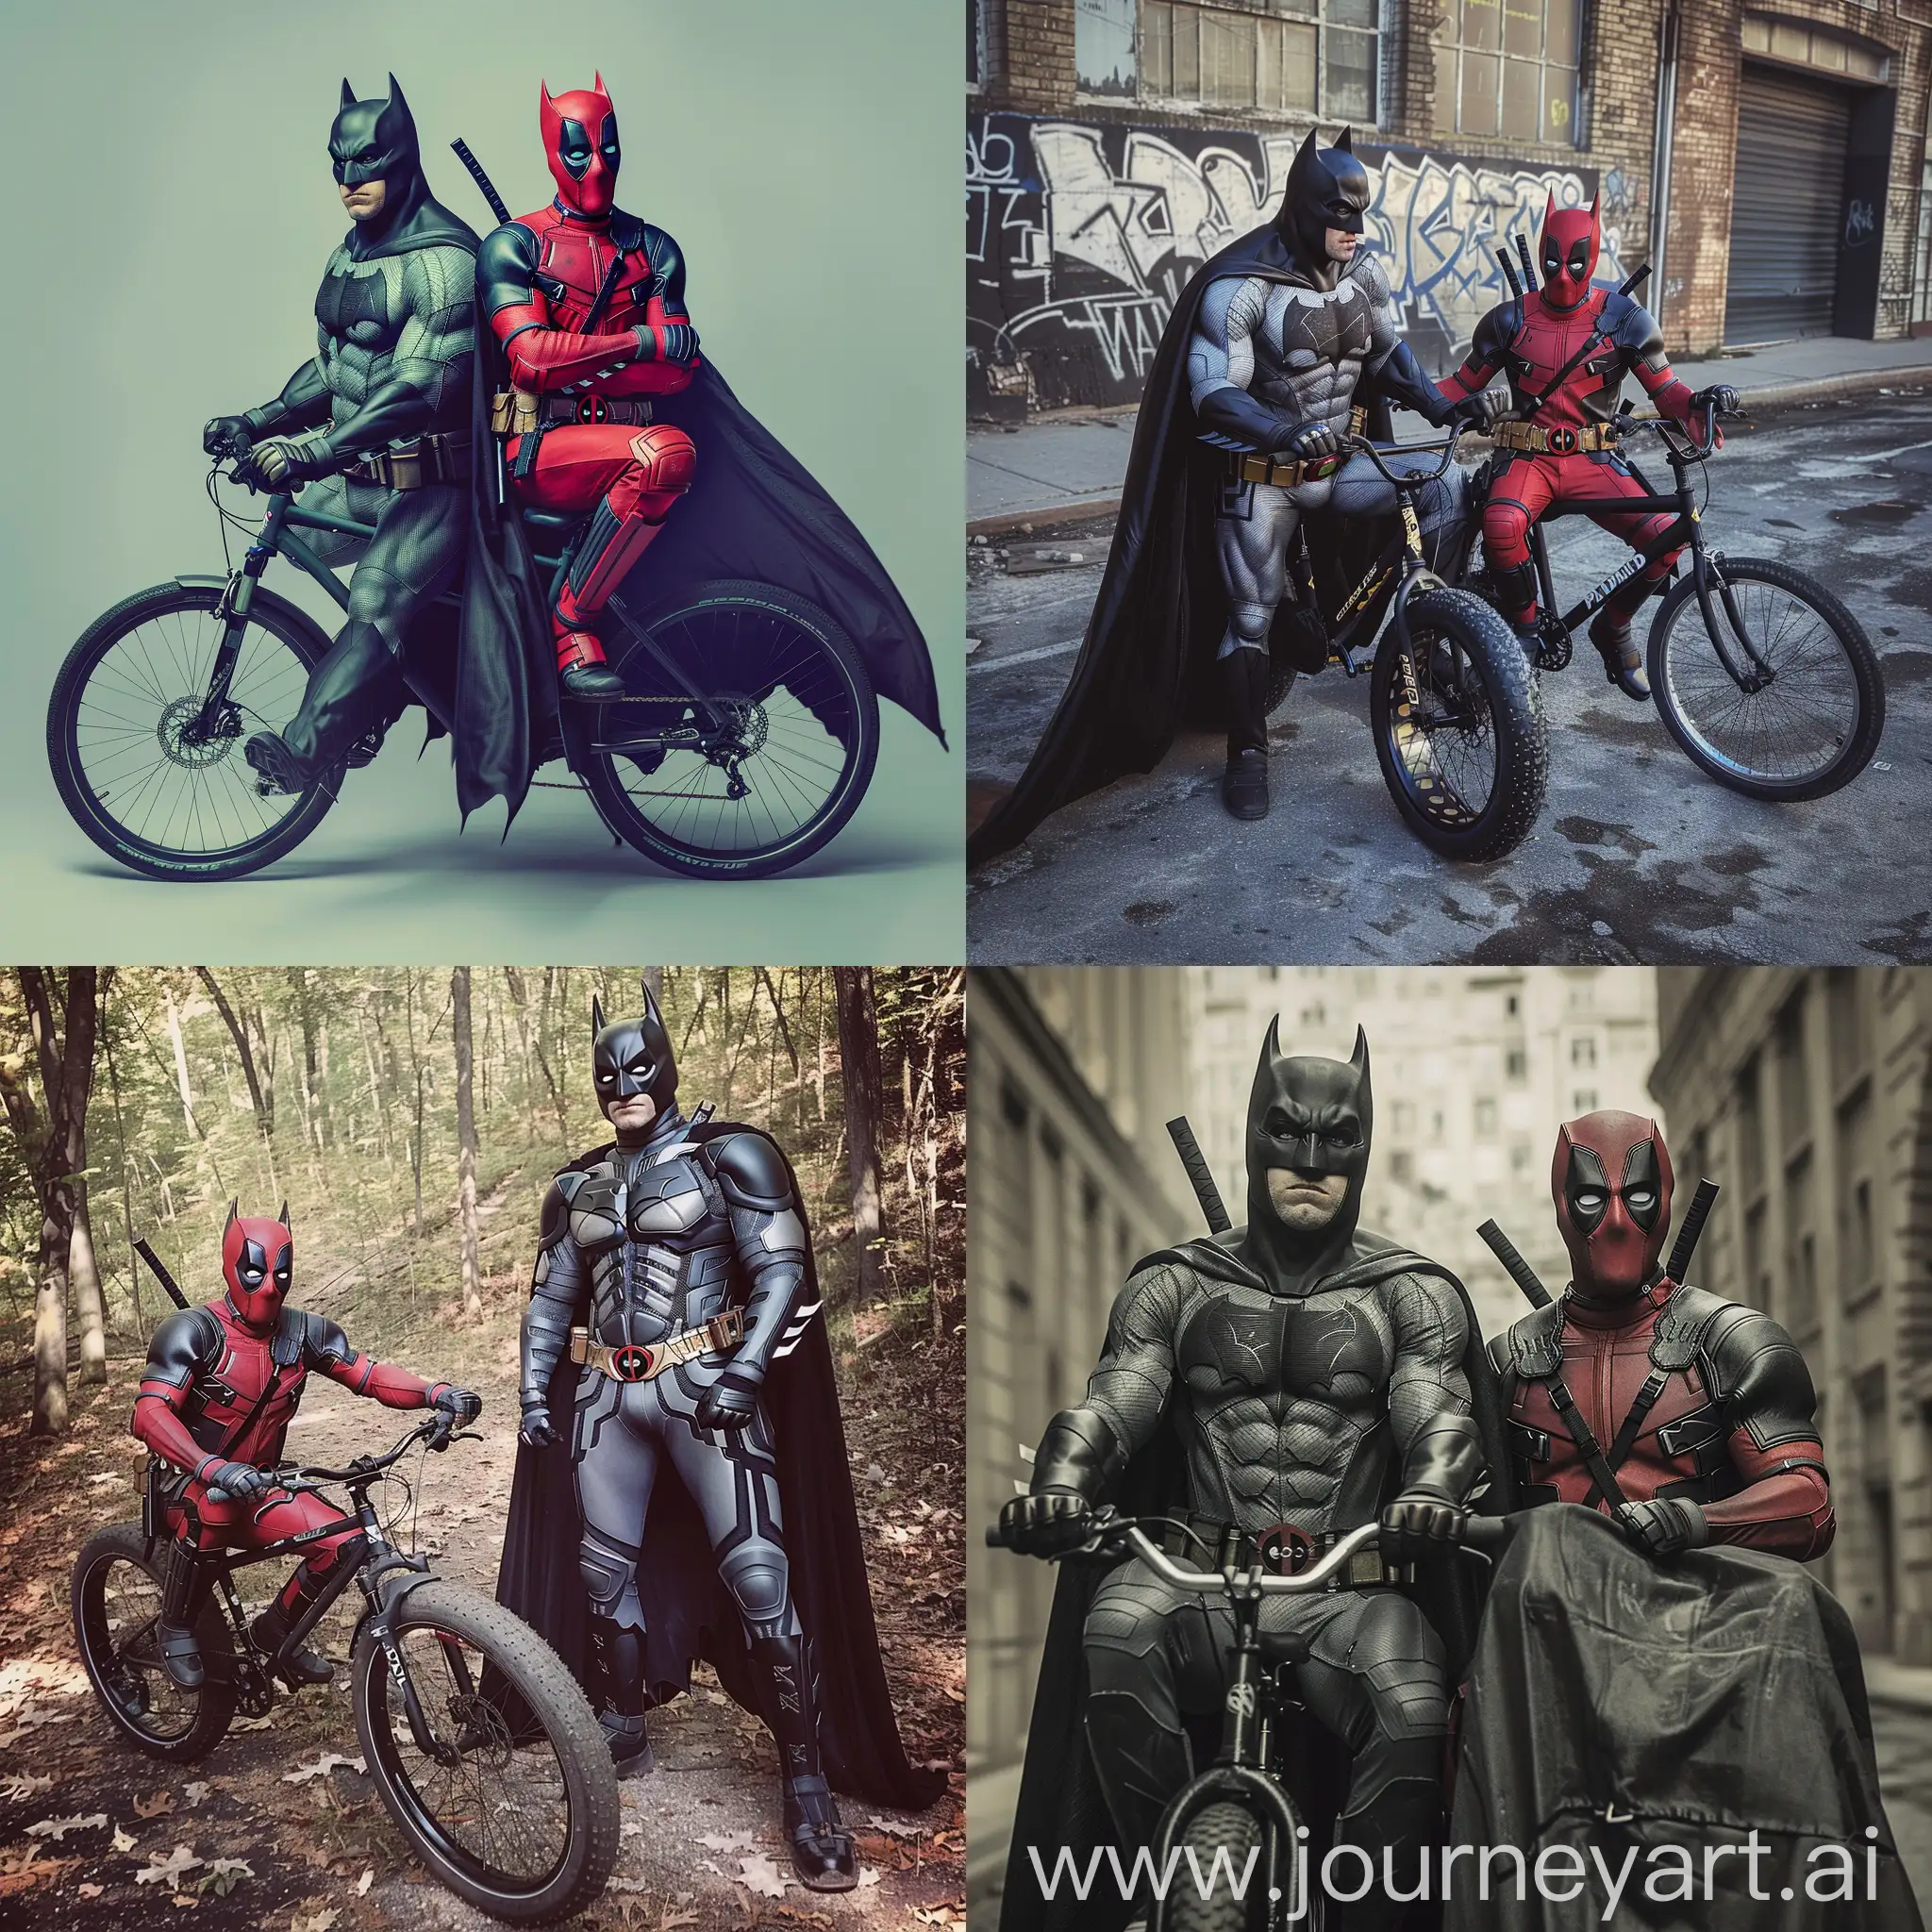 Batman-and-Deadpool-Riding-Motorcycle-Together